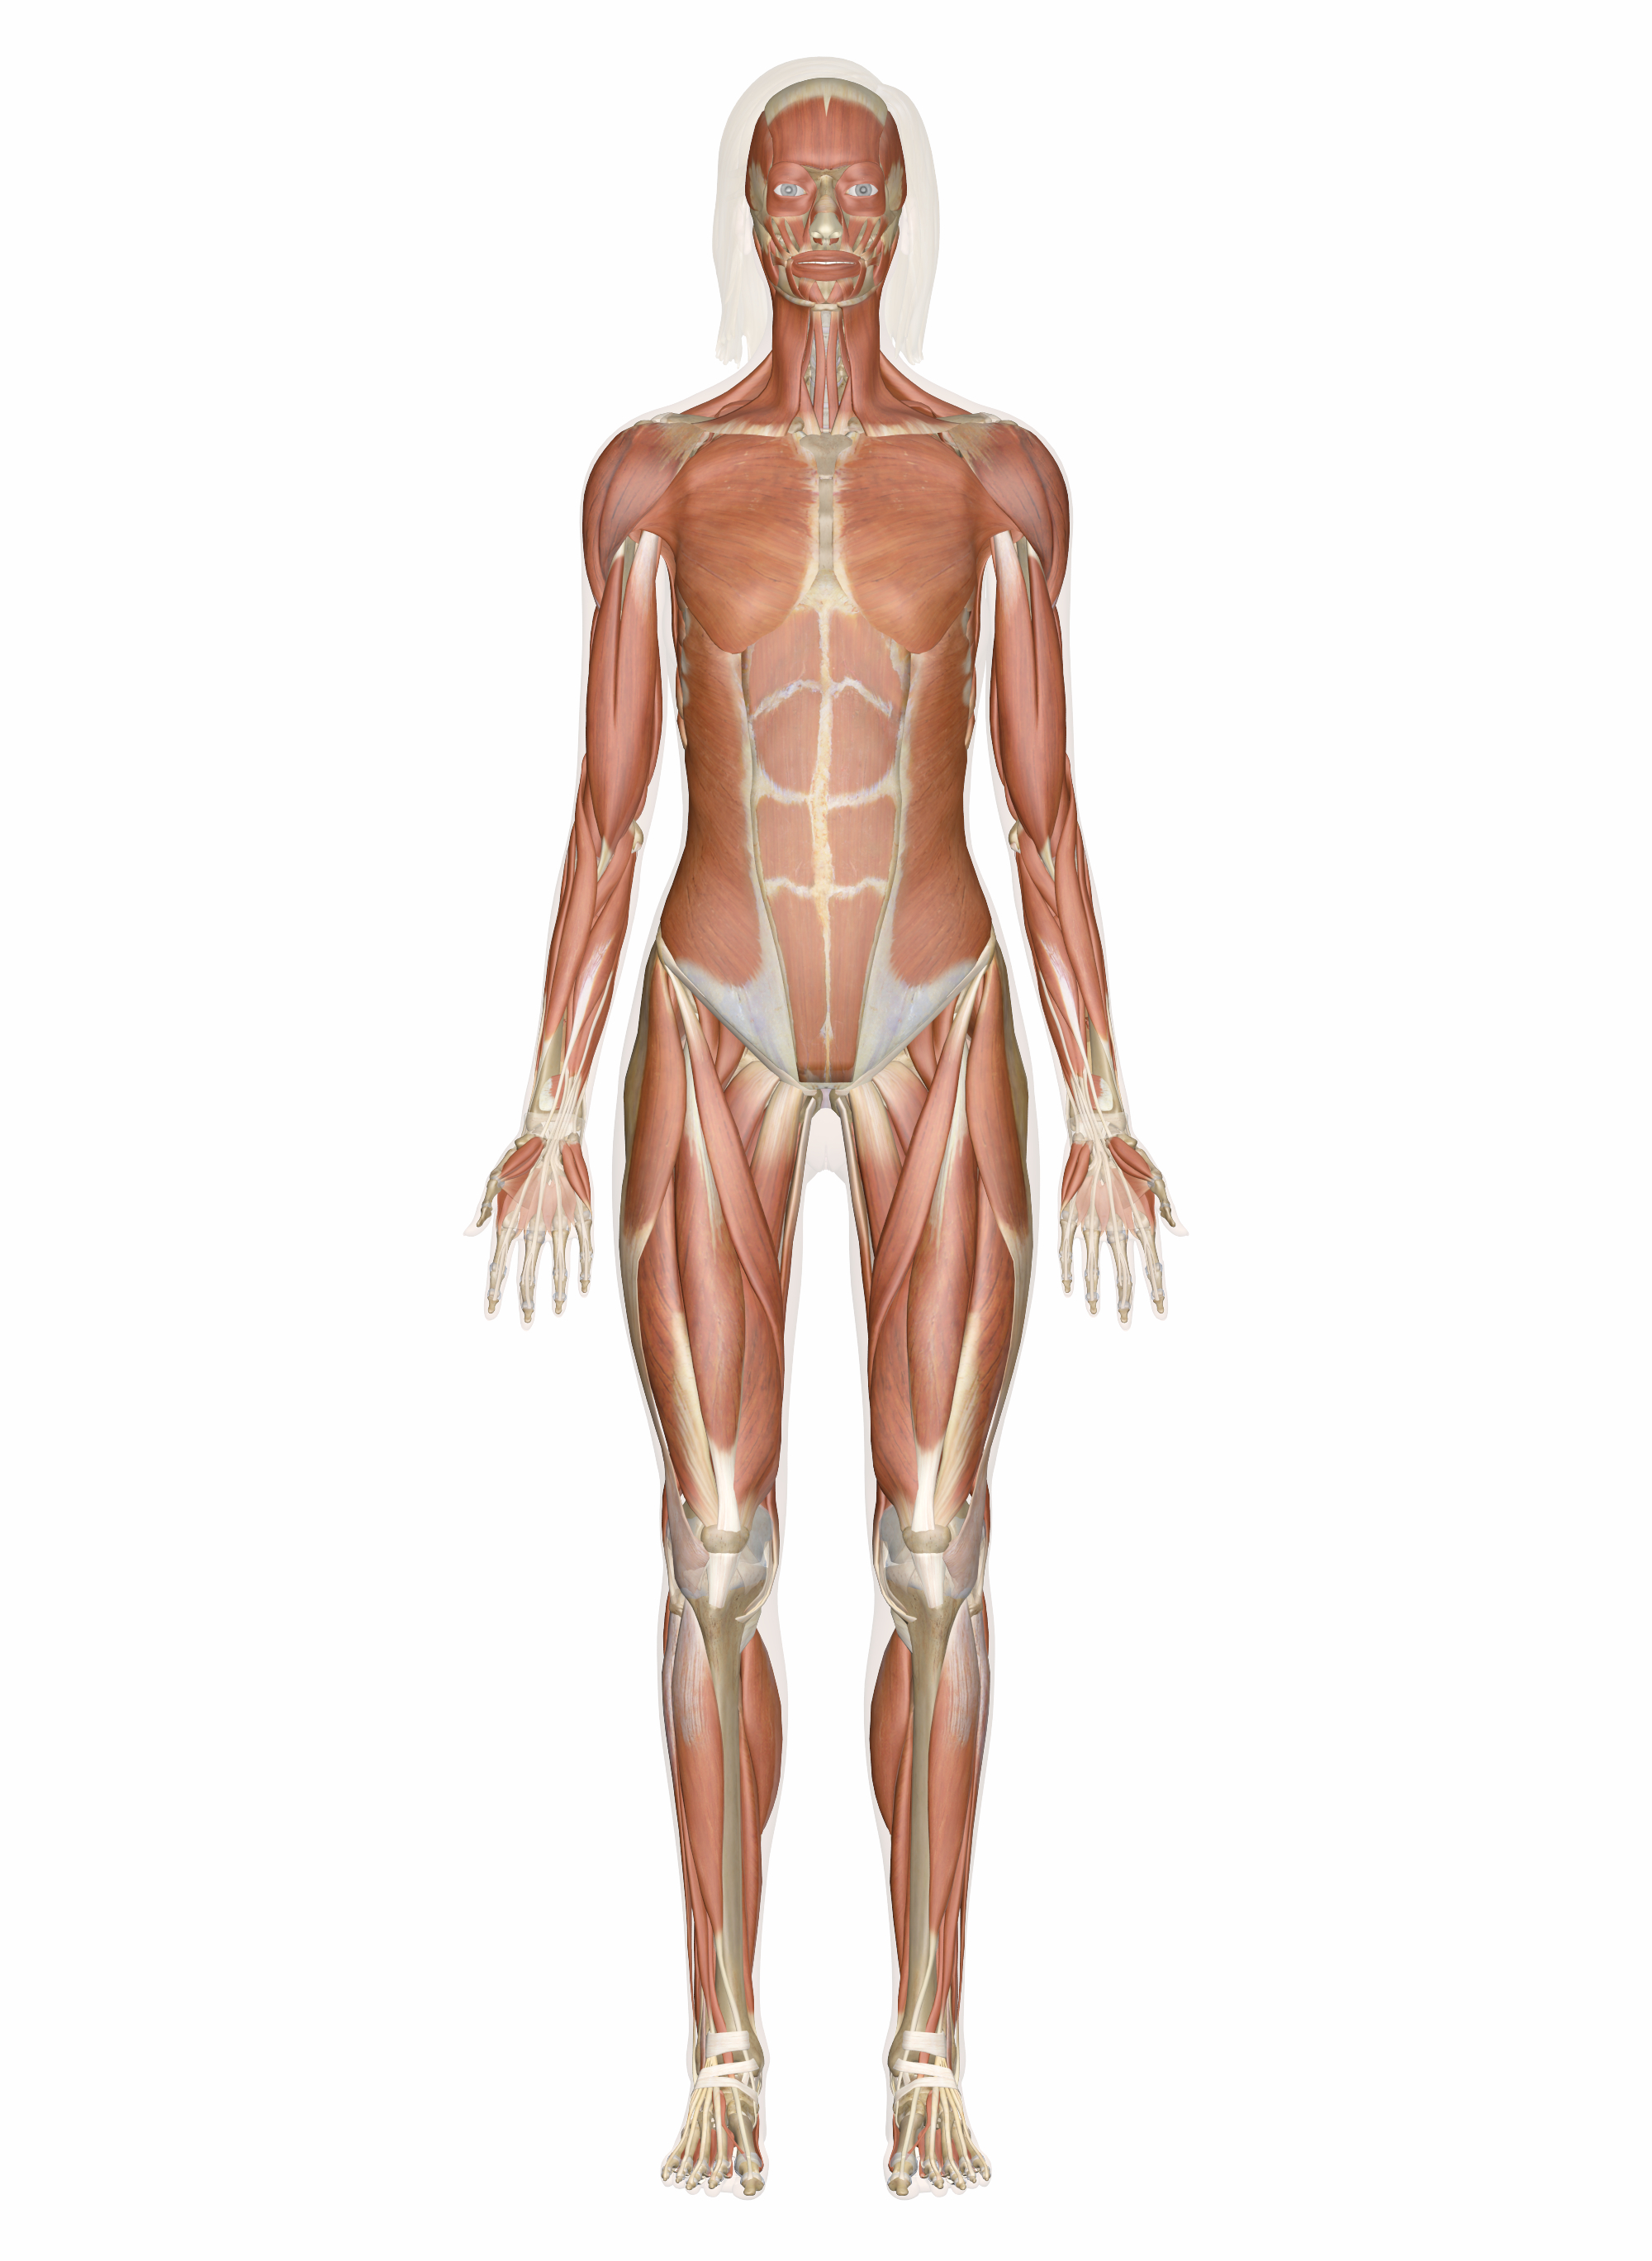 Diagram Of The Human Body Muscular System Muscles Of The Human Body